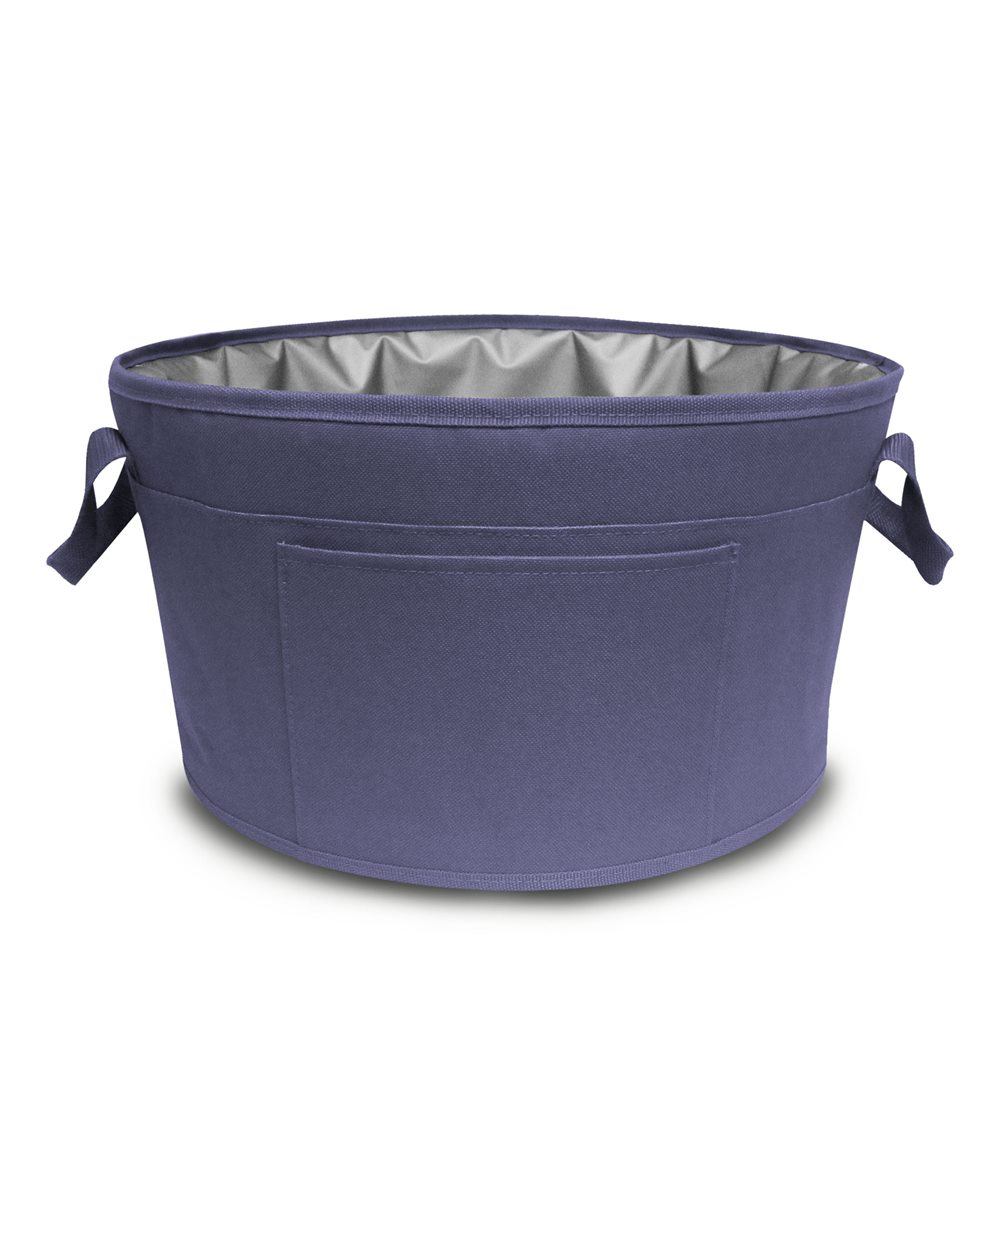 Erica Party Time Bucket Cooler-Liberty Bags